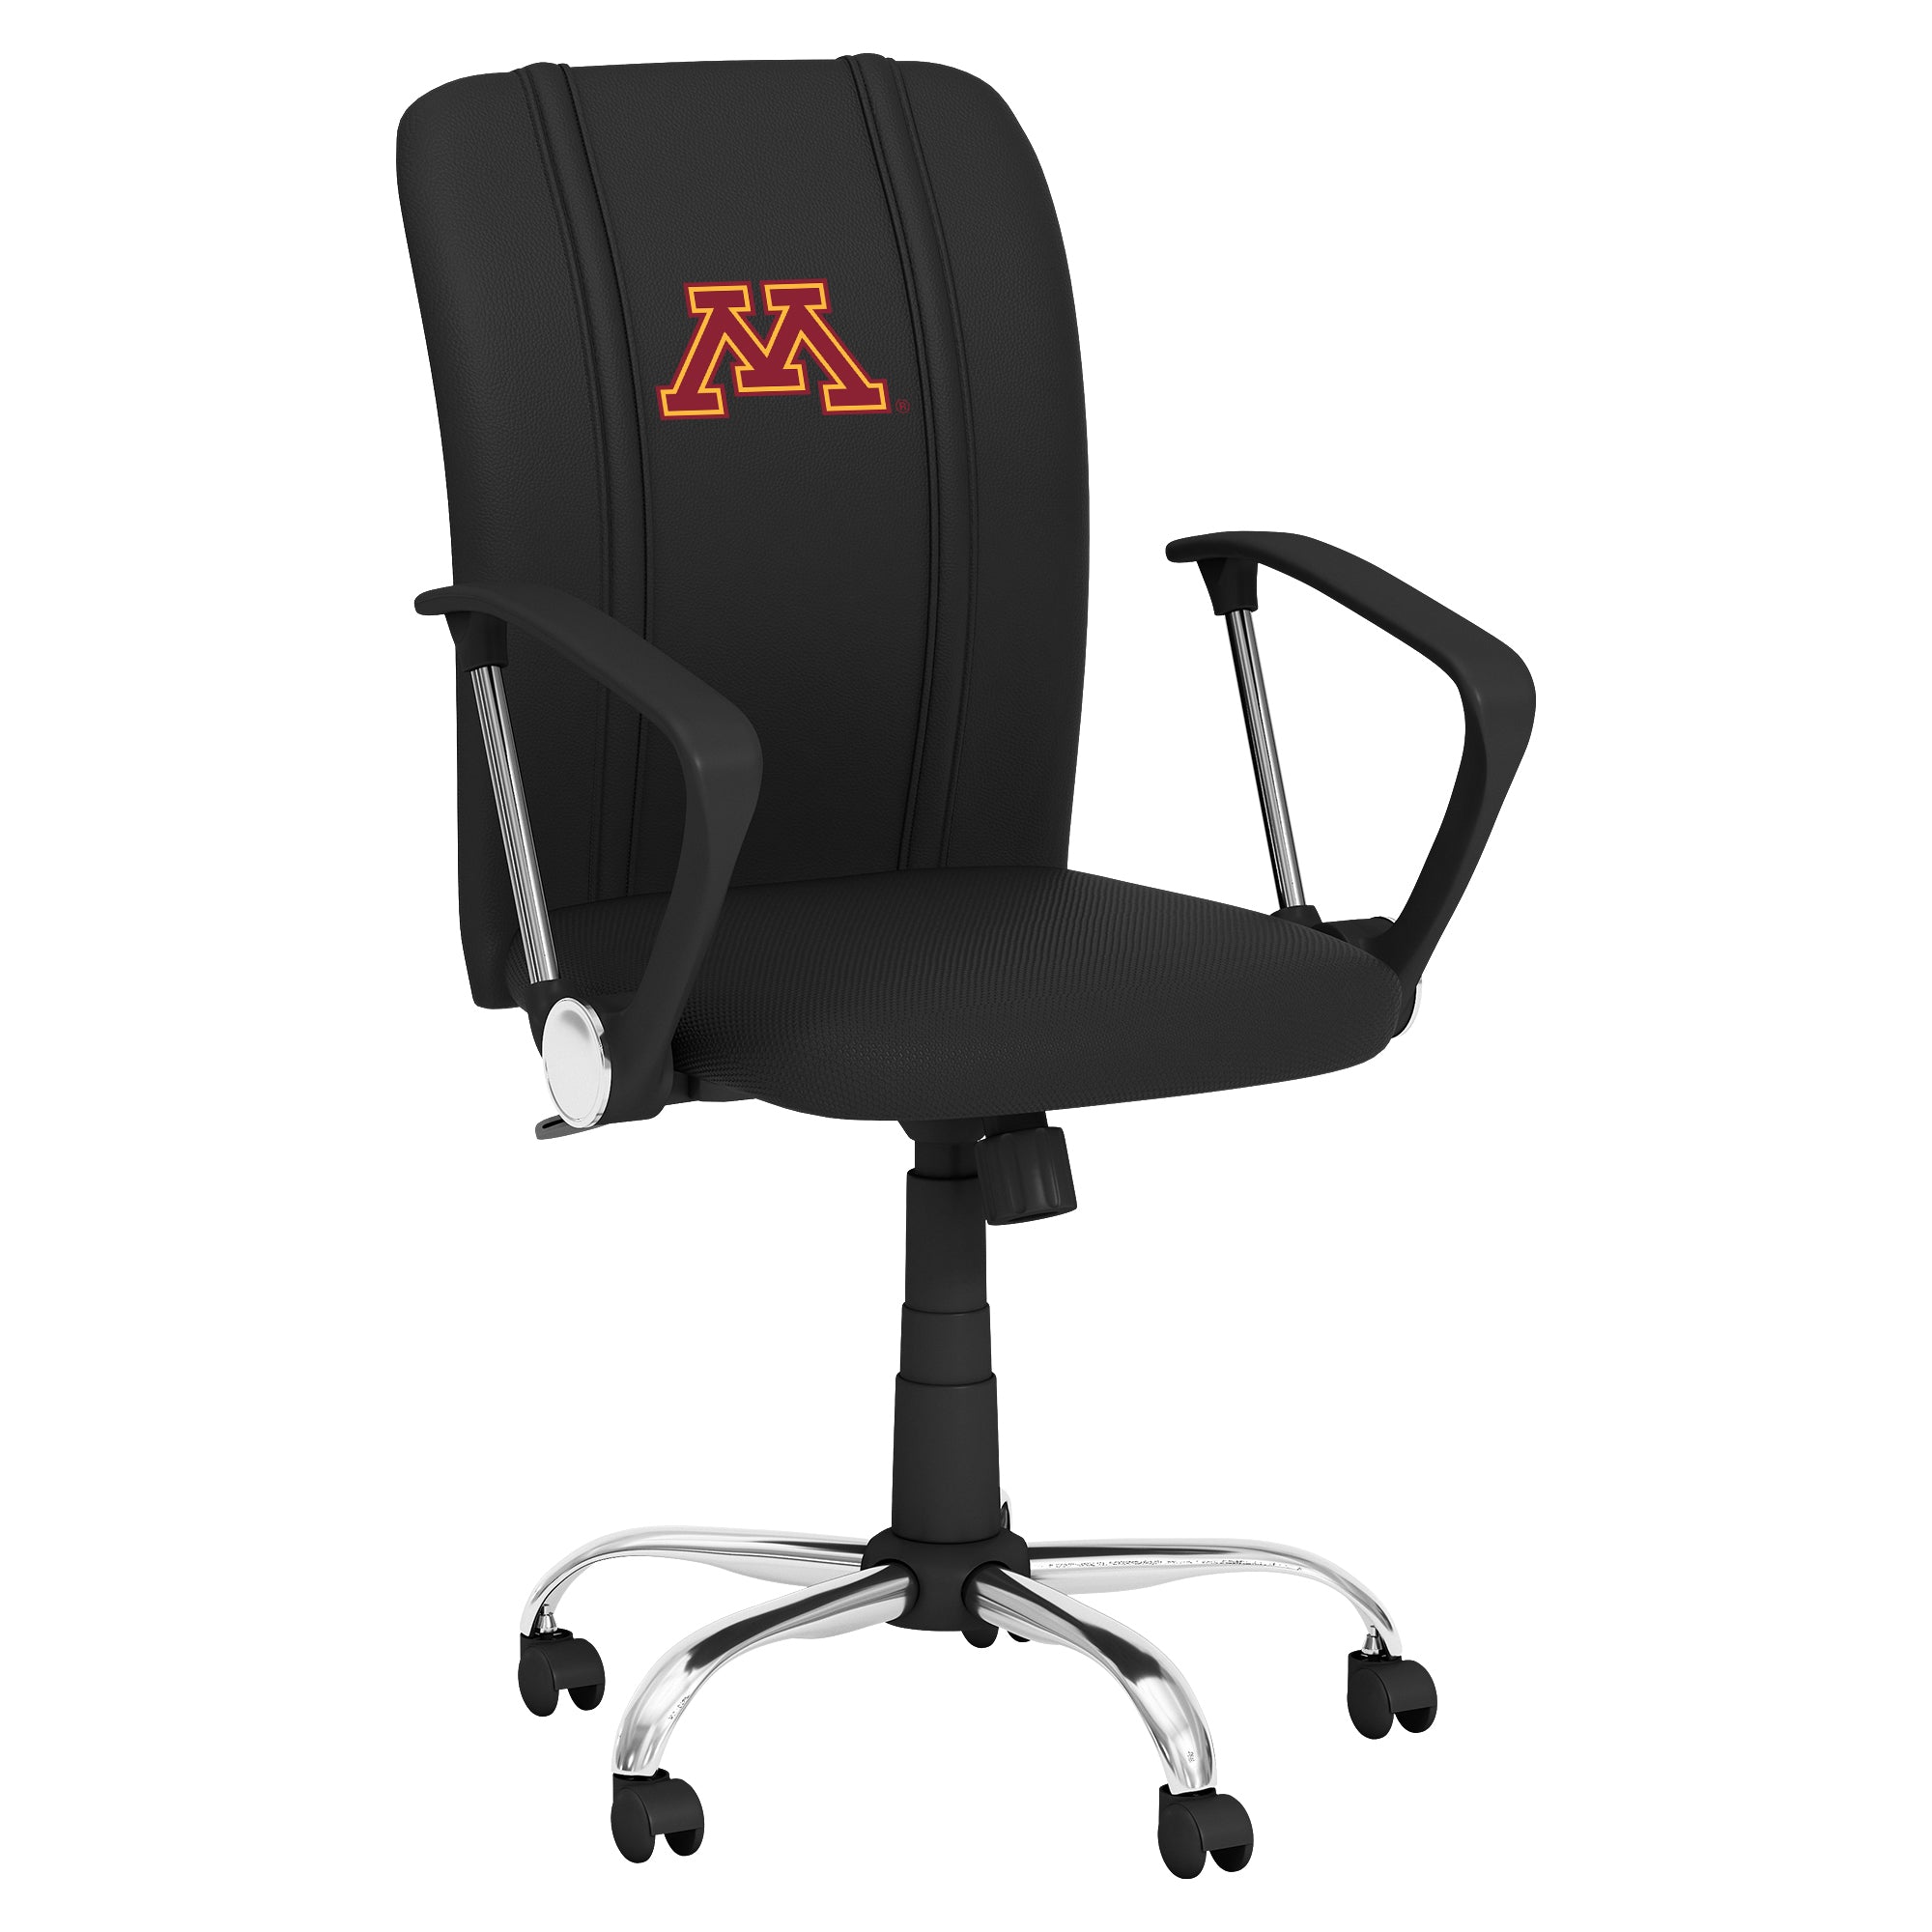 University of Minnesota Curve Task Chair with University of Minnesota Primary Logo